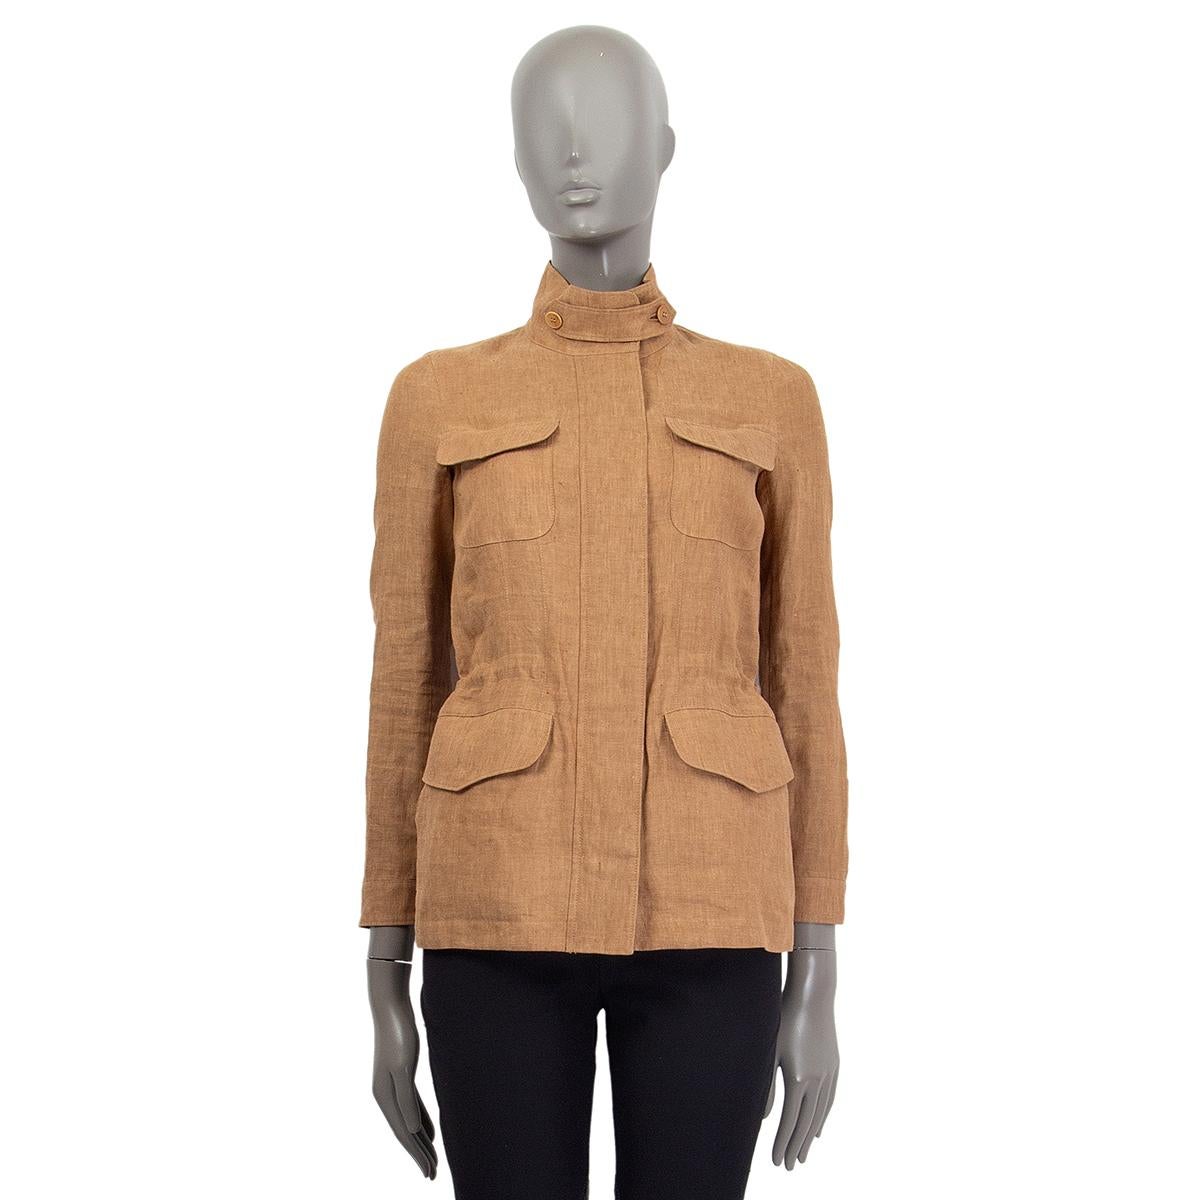 Loro Piana safari jacket from mens collection in tan linen/flax (100%) with a high collar, multi-purpose pockets and a waist drawstring. Closes on the front with a gold tone zipper and gold tone snap buttons. Cuffs close with gold tone snap buttons.